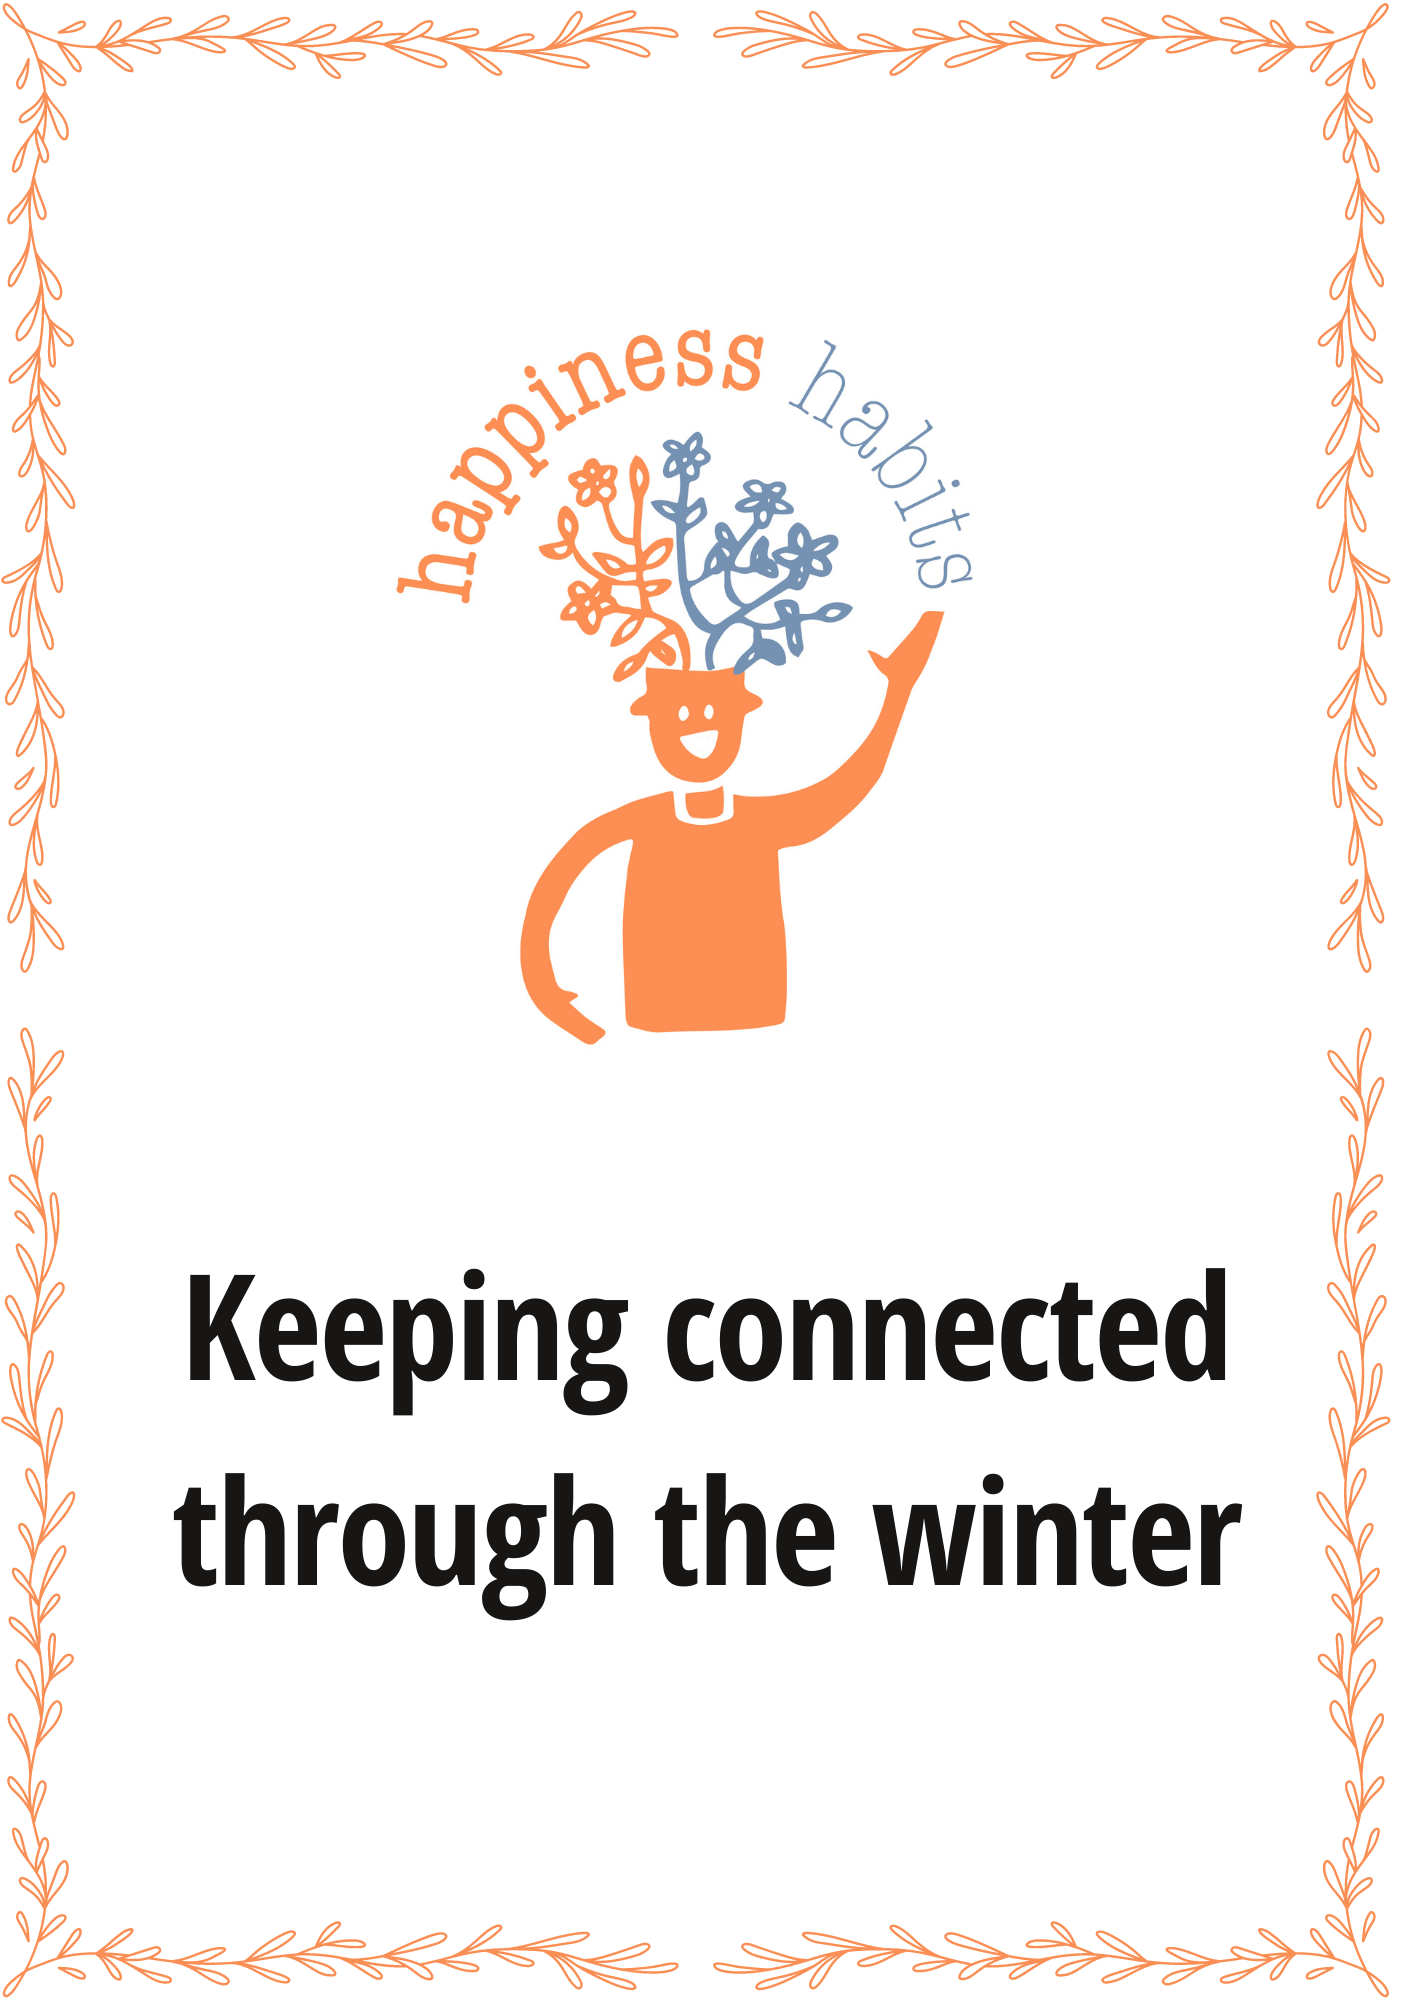 Happiness habits. Keeping connected through the winter